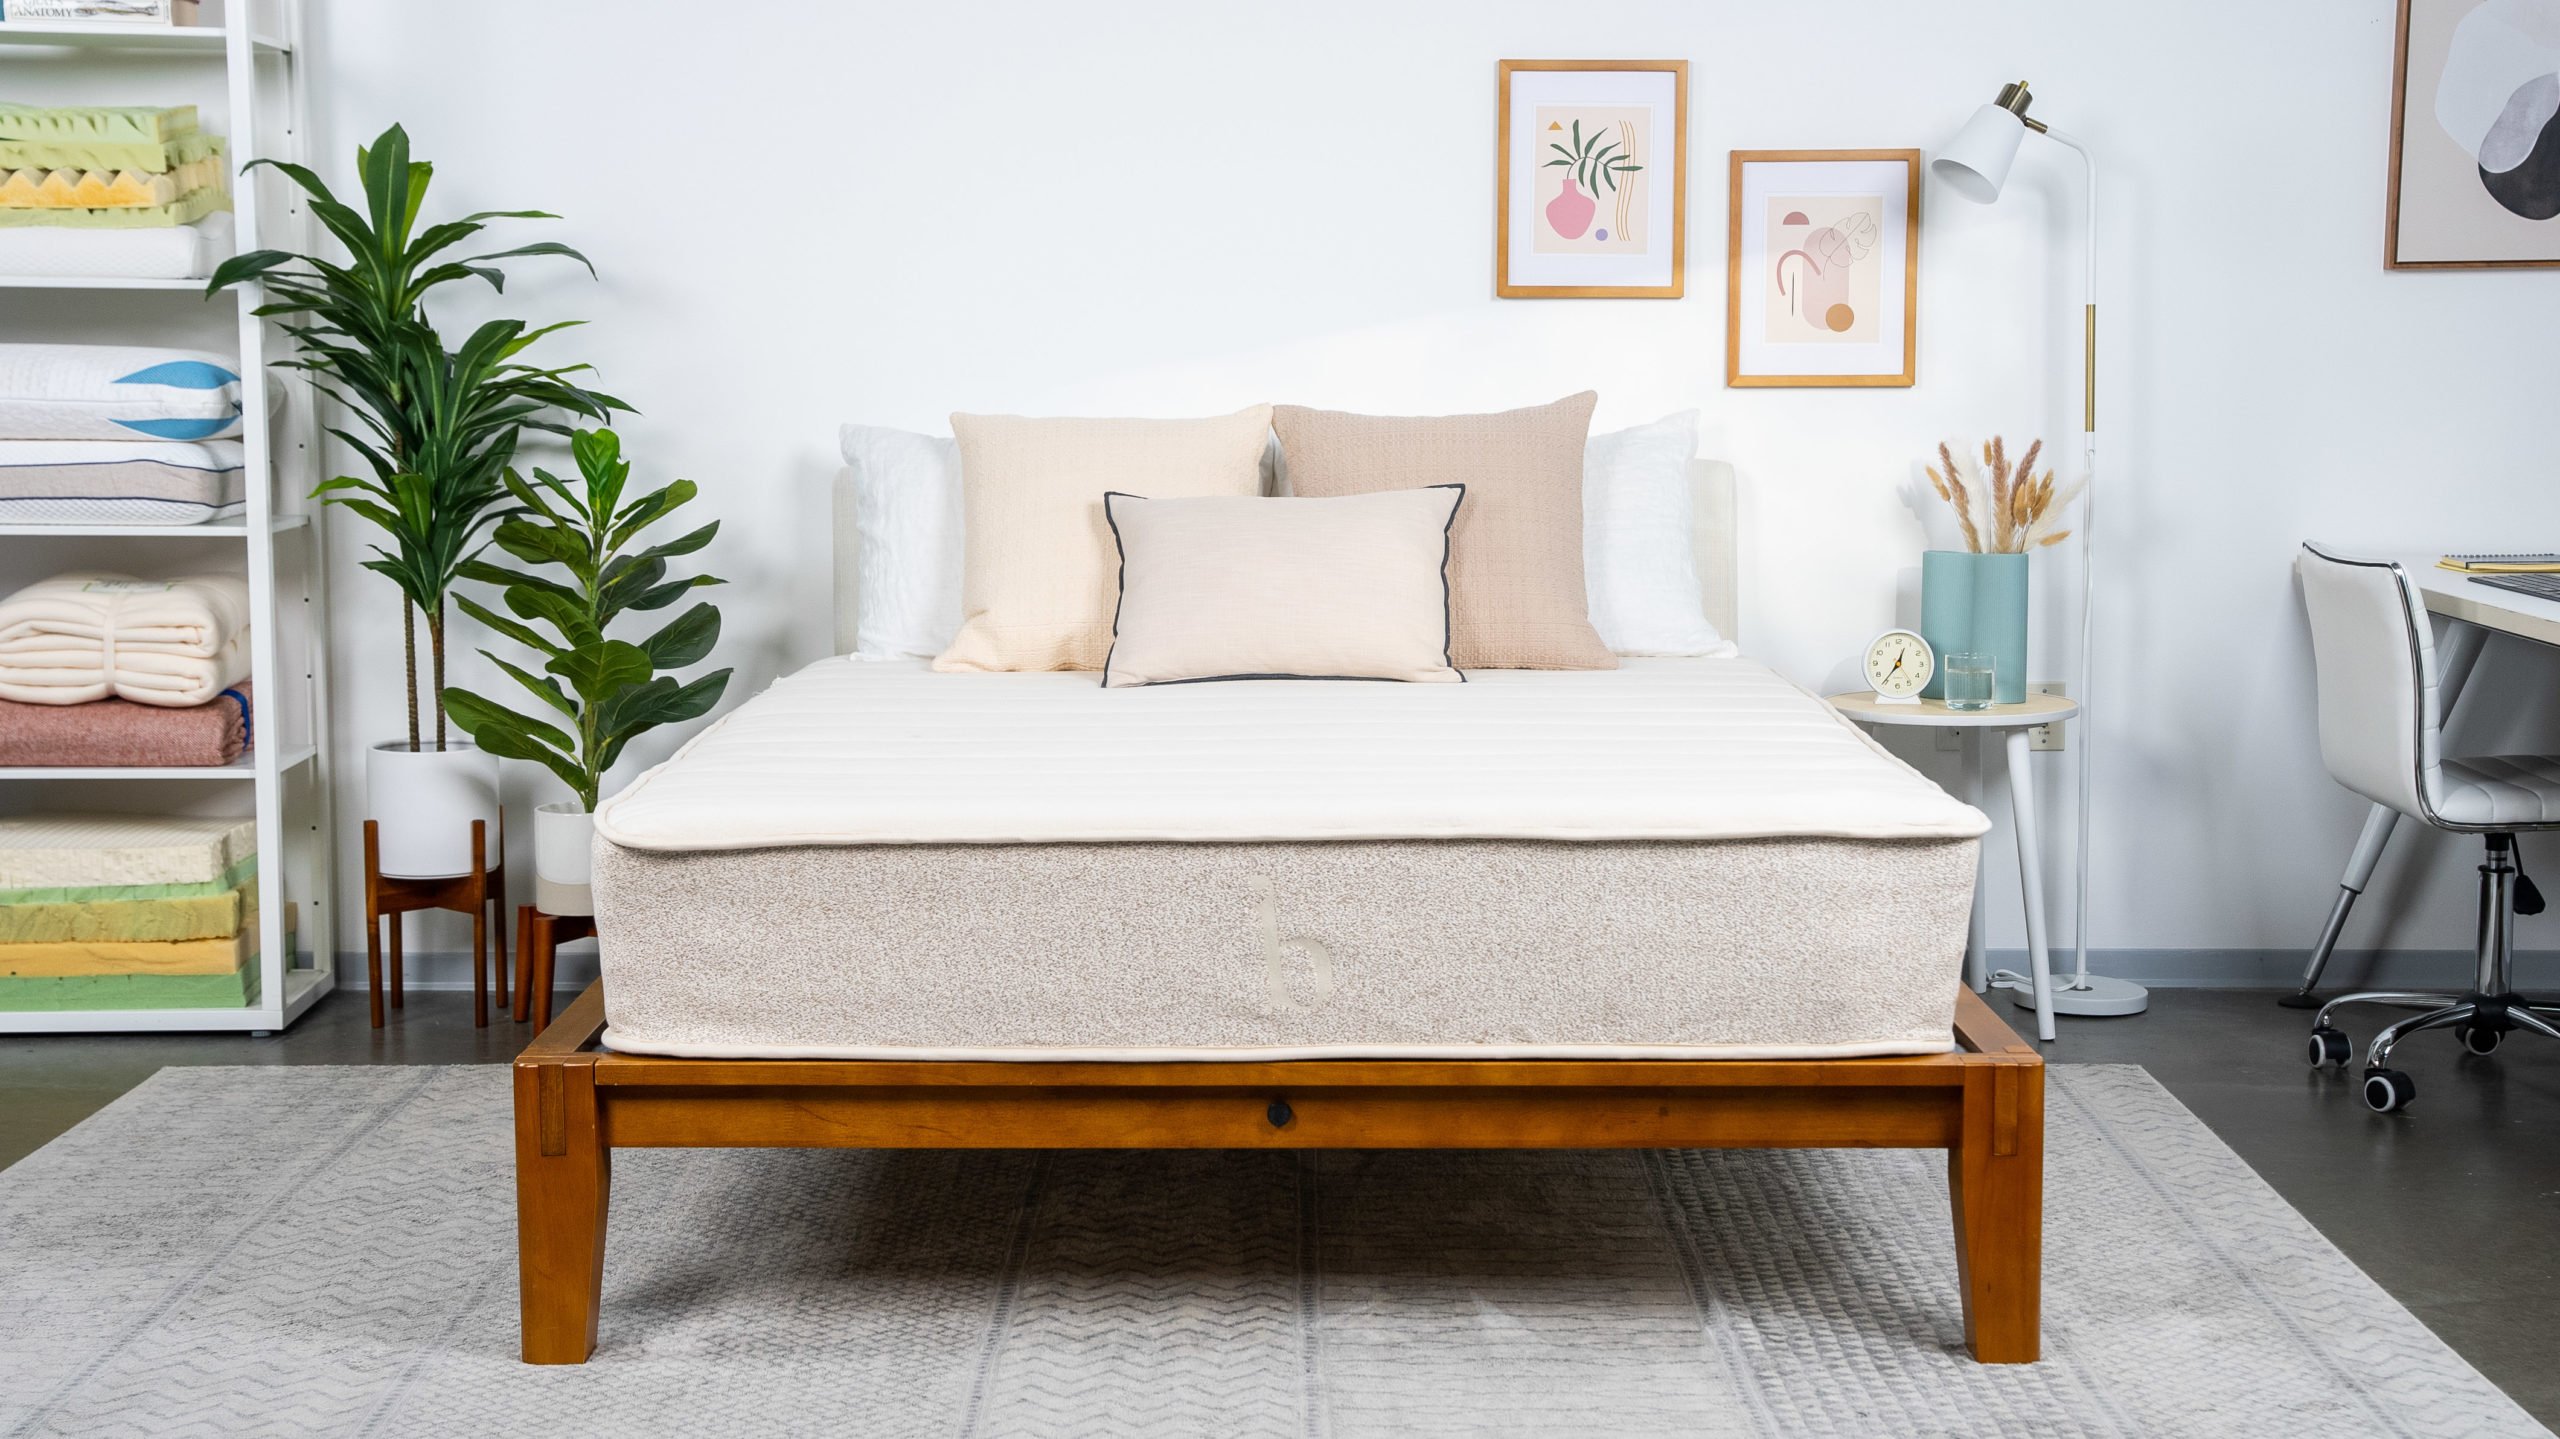 Birch Mattress Review Ratings from the Test Lab